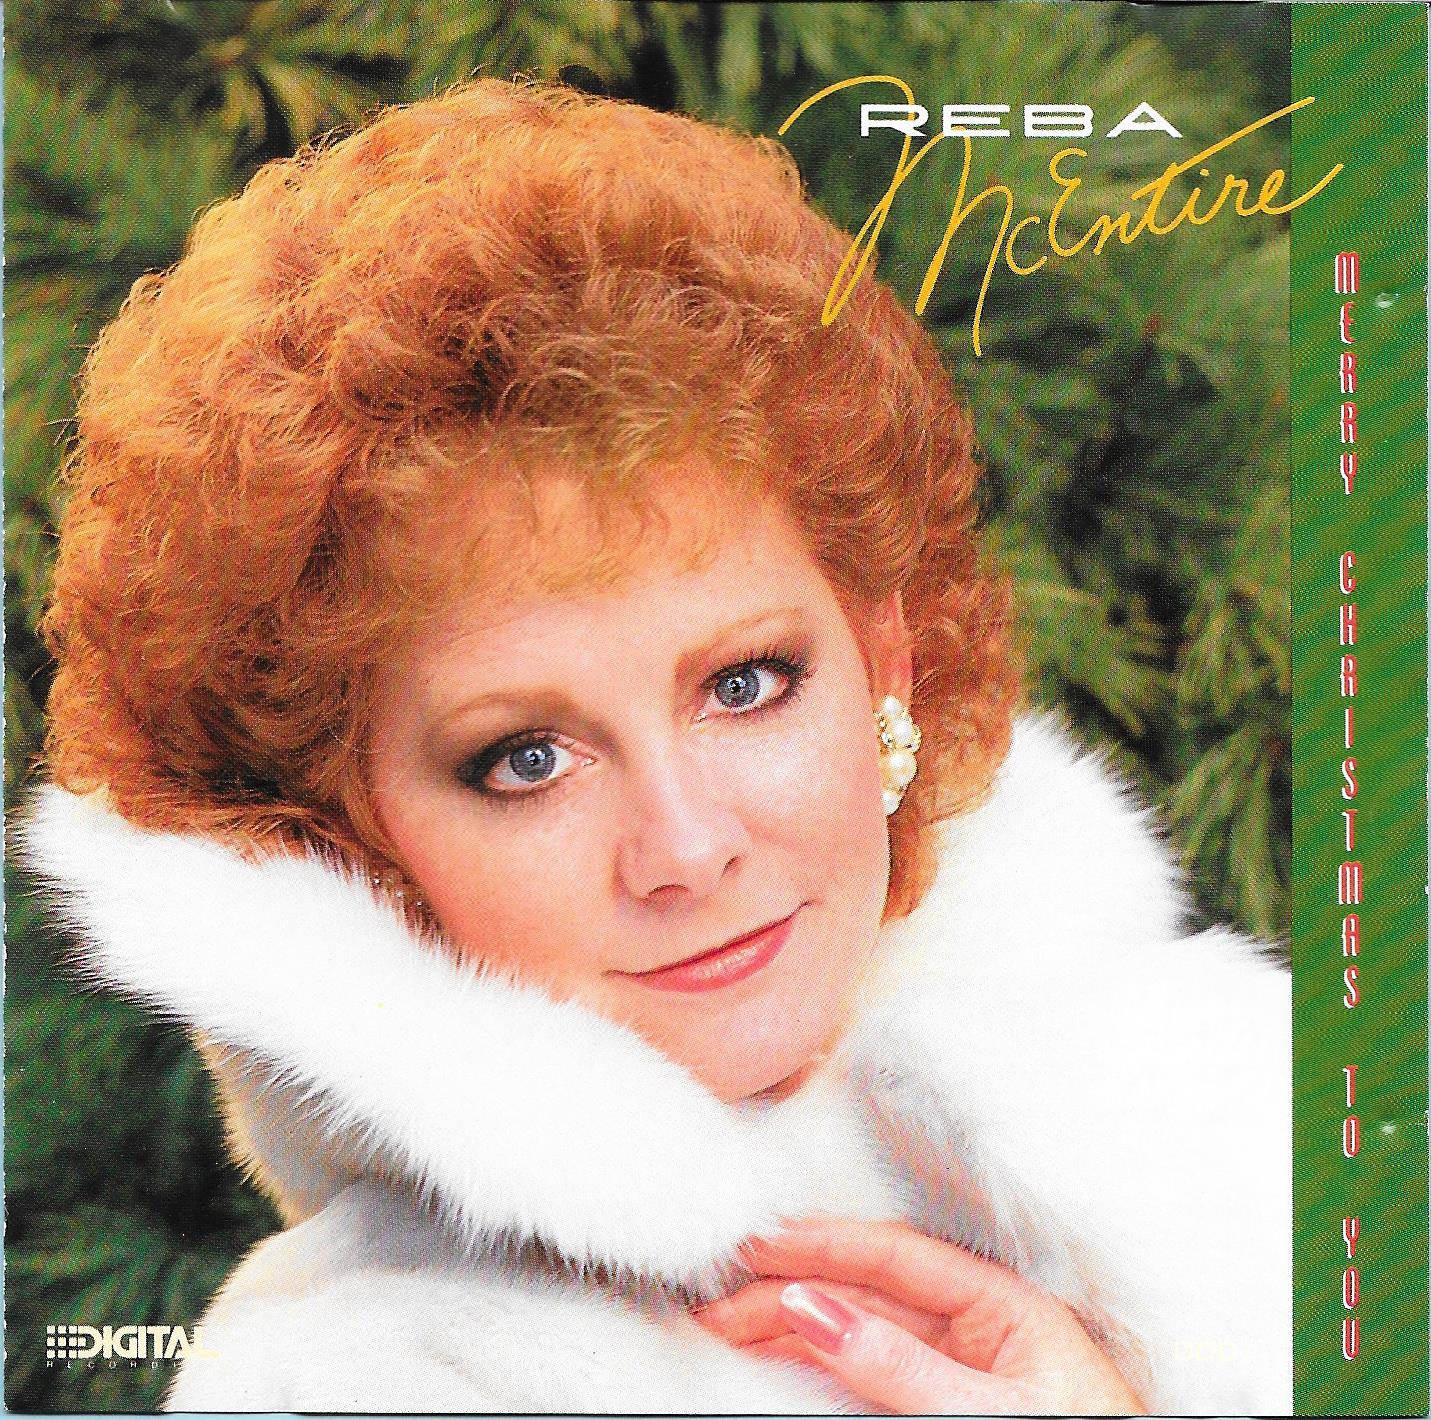 Art for Silent Night by Reba McEntire